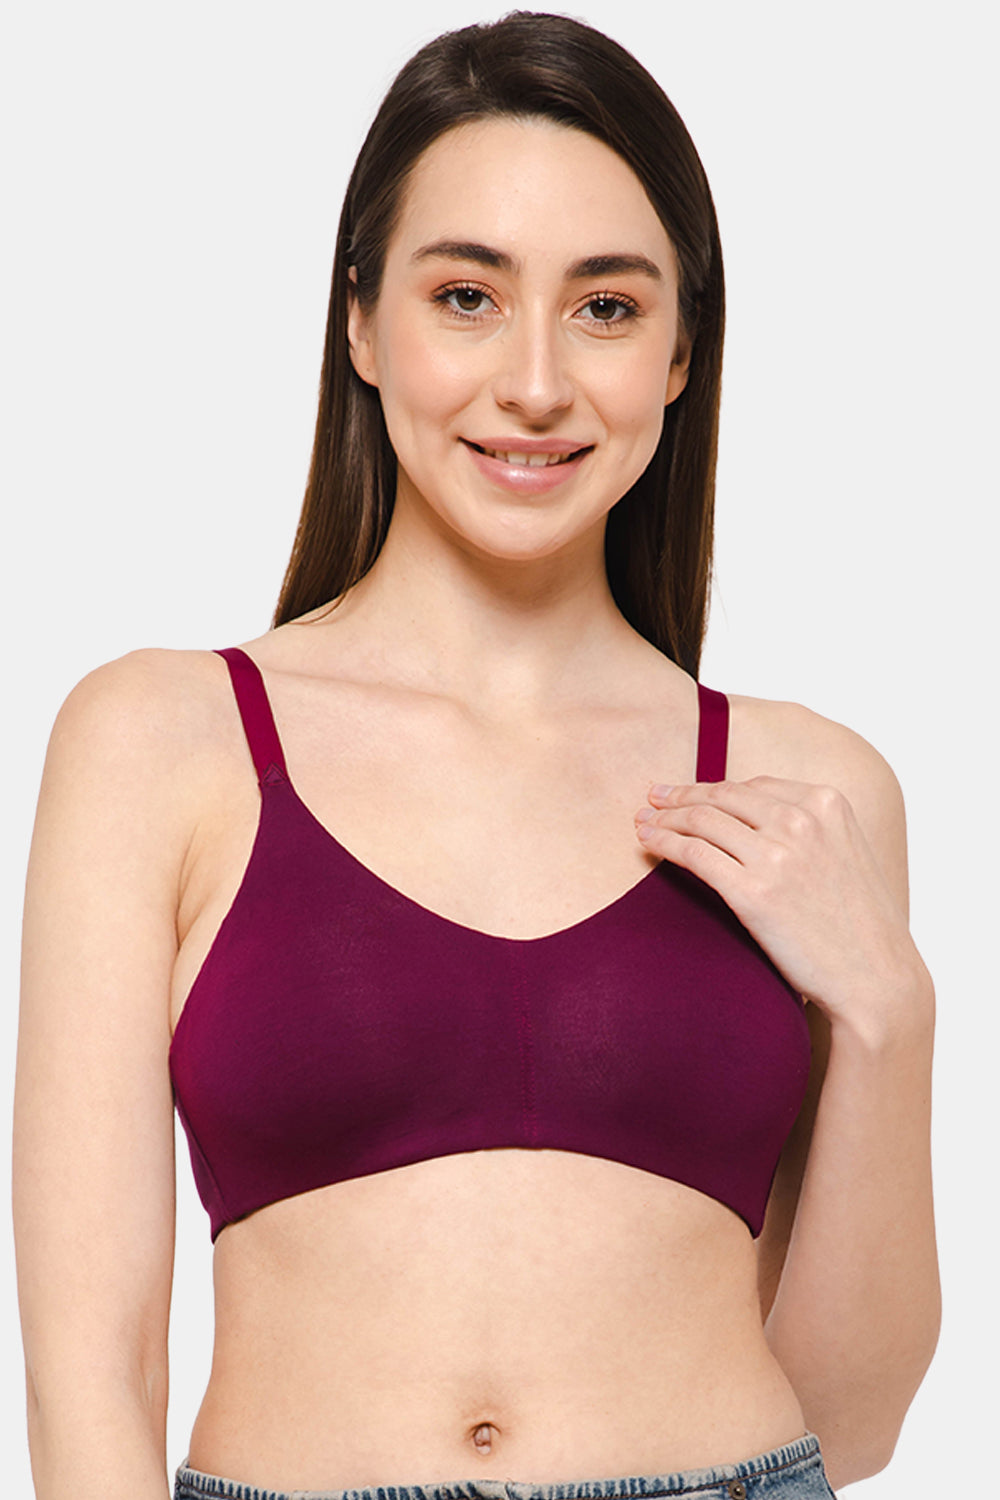 Buy INTIMACY LINGERIE Sports Bras for Women, Non-Padded, Non-Wired, Moderate Coverage